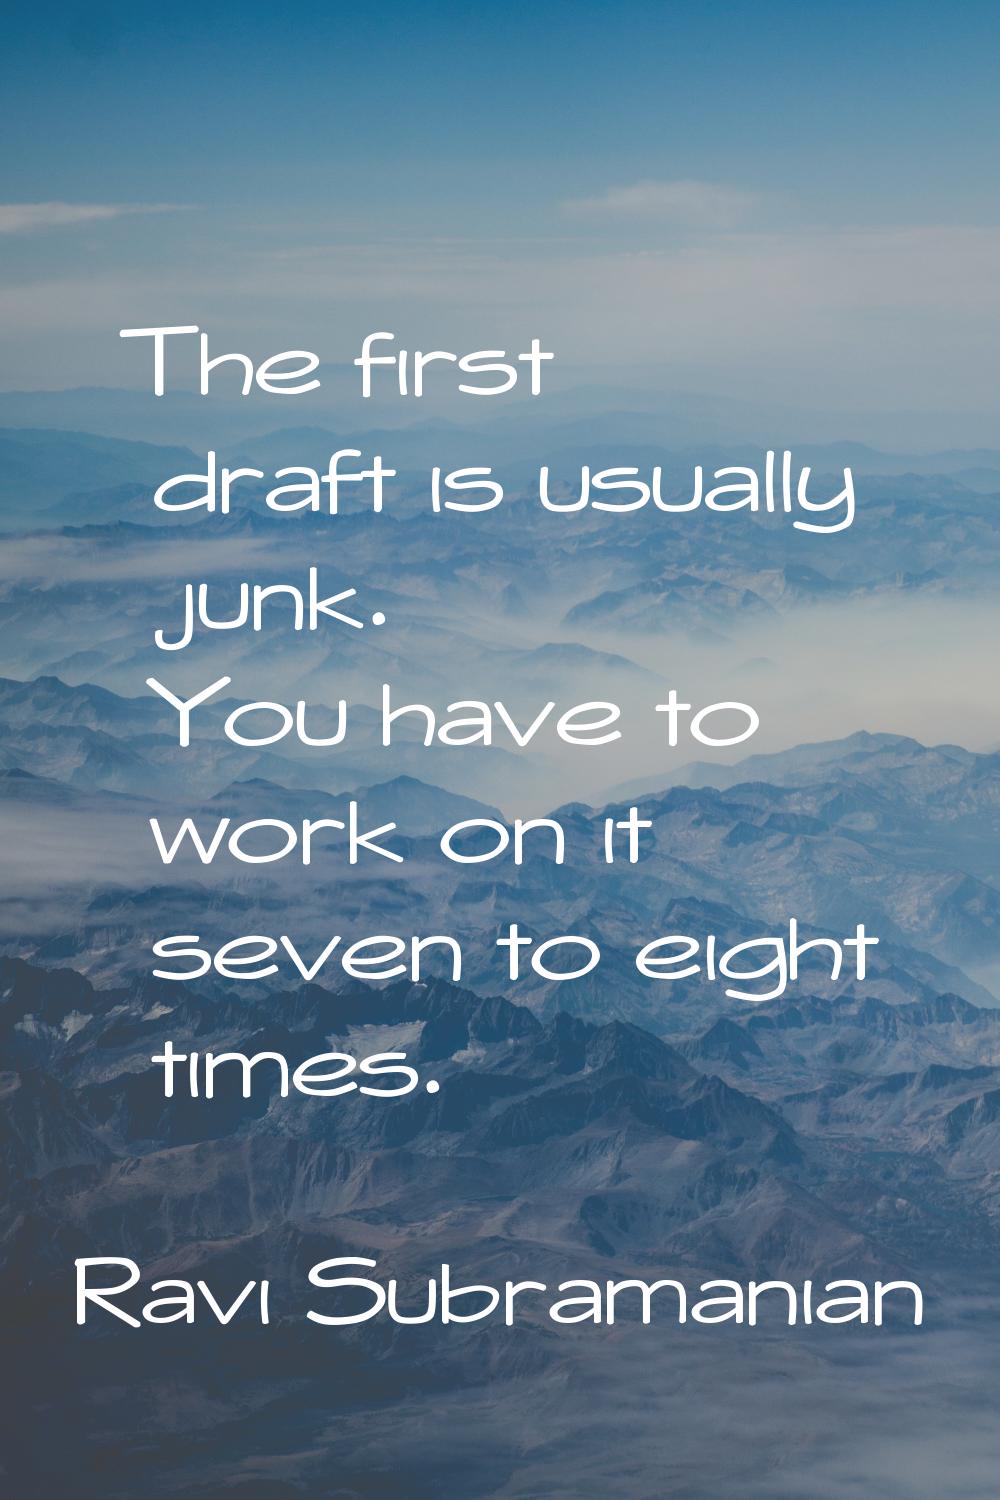 The first draft is usually junk. You have to work on it seven to eight times.